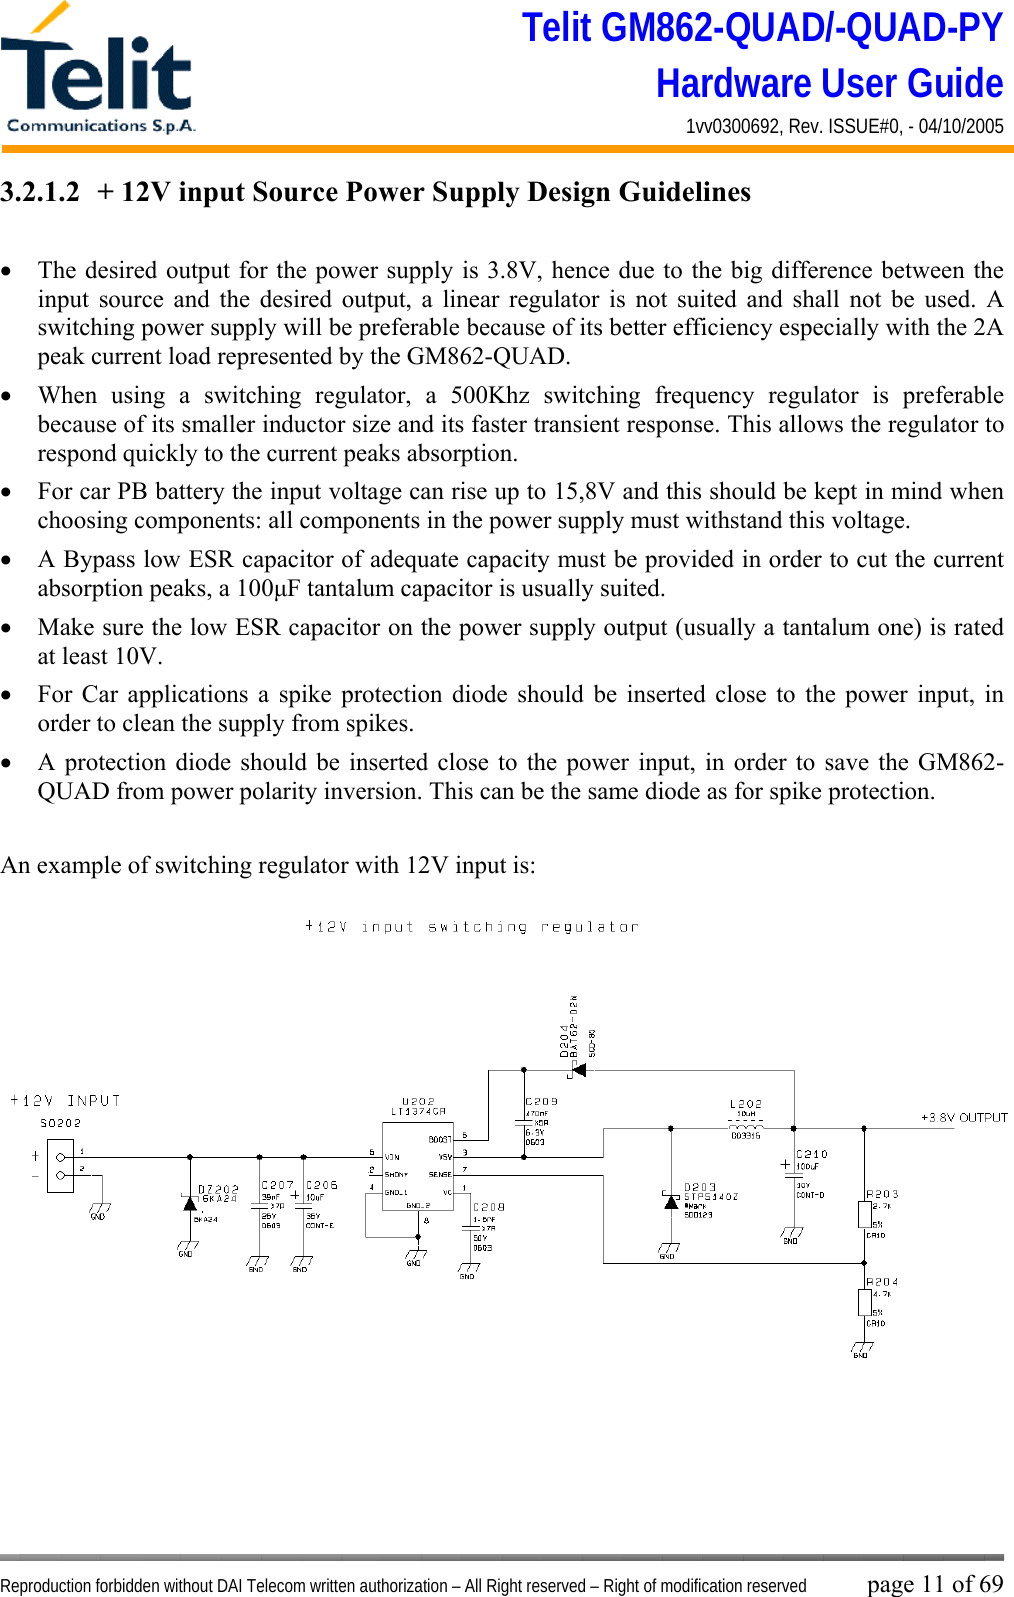 Telit GM862-QUAD/-QUAD-PY Hardware User Guide 1vv0300692, Rev. ISSUE#0, - 04/10/2005   Reproduction forbidden without DAI Telecom written authorization – All Right reserved – Right of modification reserved page 11 of 69 3.2.1.2  + 12V input Source Power Supply Design Guidelines  •  The desired output for the power supply is 3.8V, hence due to the big difference between the input source and the desired output, a linear regulator is not suited and shall not be used. A switching power supply will be preferable because of its better efficiency especially with the 2A peak current load represented by the GM862-QUAD. •  When using a switching regulator, a 500Khz switching frequency regulator is preferable because of its smaller inductor size and its faster transient response. This allows the regulator to respond quickly to the current peaks absorption.  •  For car PB battery the input voltage can rise up to 15,8V and this should be kept in mind when choosing components: all components in the power supply must withstand this voltage. •  A Bypass low ESR capacitor of adequate capacity must be provided in order to cut the current absorption peaks, a 100μF tantalum capacitor is usually suited. •  Make sure the low ESR capacitor on the power supply output (usually a tantalum one) is rated at least 10V. •  For Car applications a spike protection diode should be inserted close to the power input, in order to clean the supply from spikes.  •  A protection diode should be inserted close to the power input, in order to save the GM862-QUAD from power polarity inversion. This can be the same diode as for spike protection.  An example of switching regulator with 12V input is:  